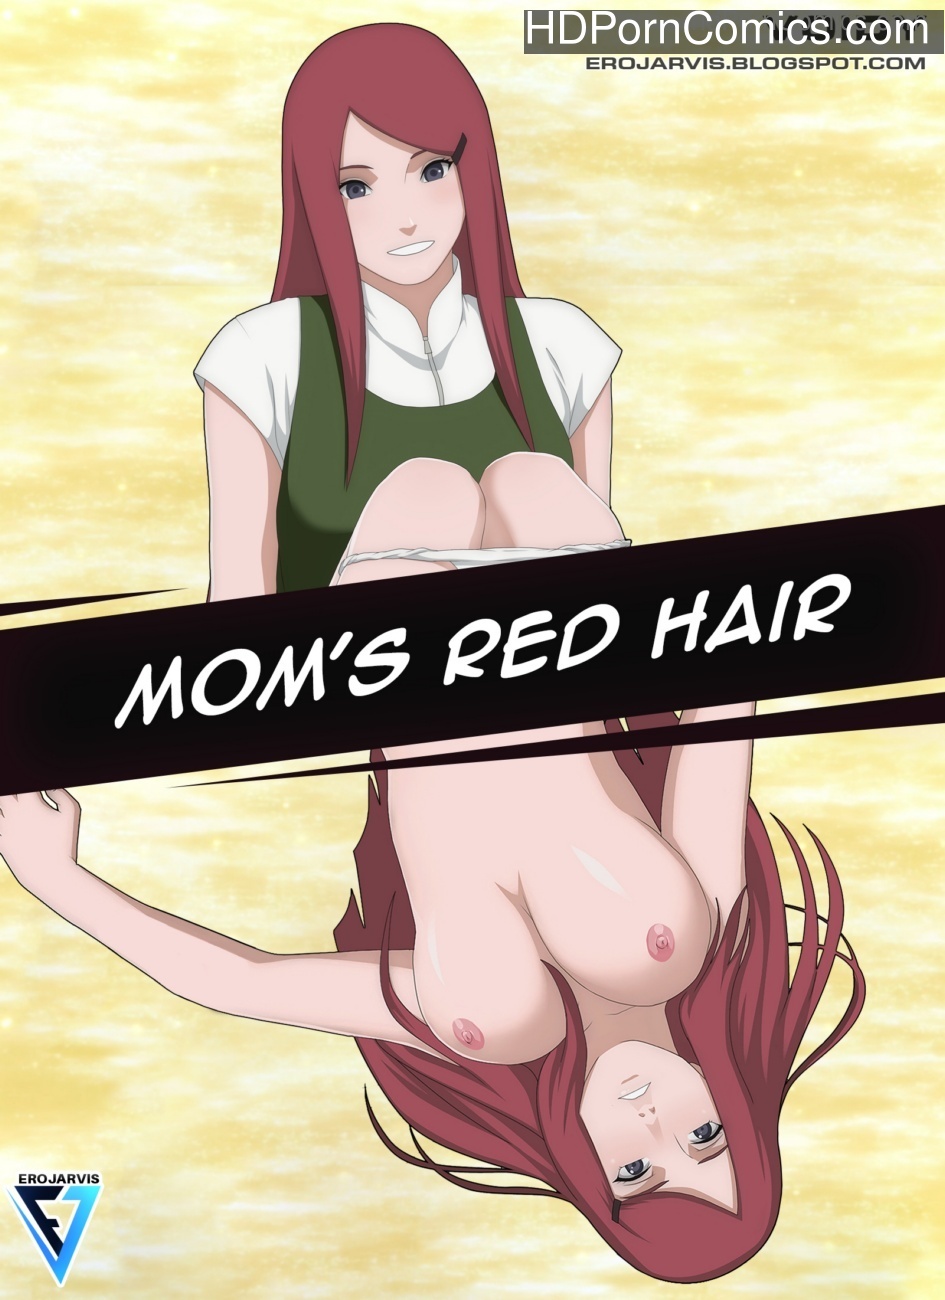 Red Hair Mother Porn - Mom's Red Hair Sex Comic - HD Porn Comics